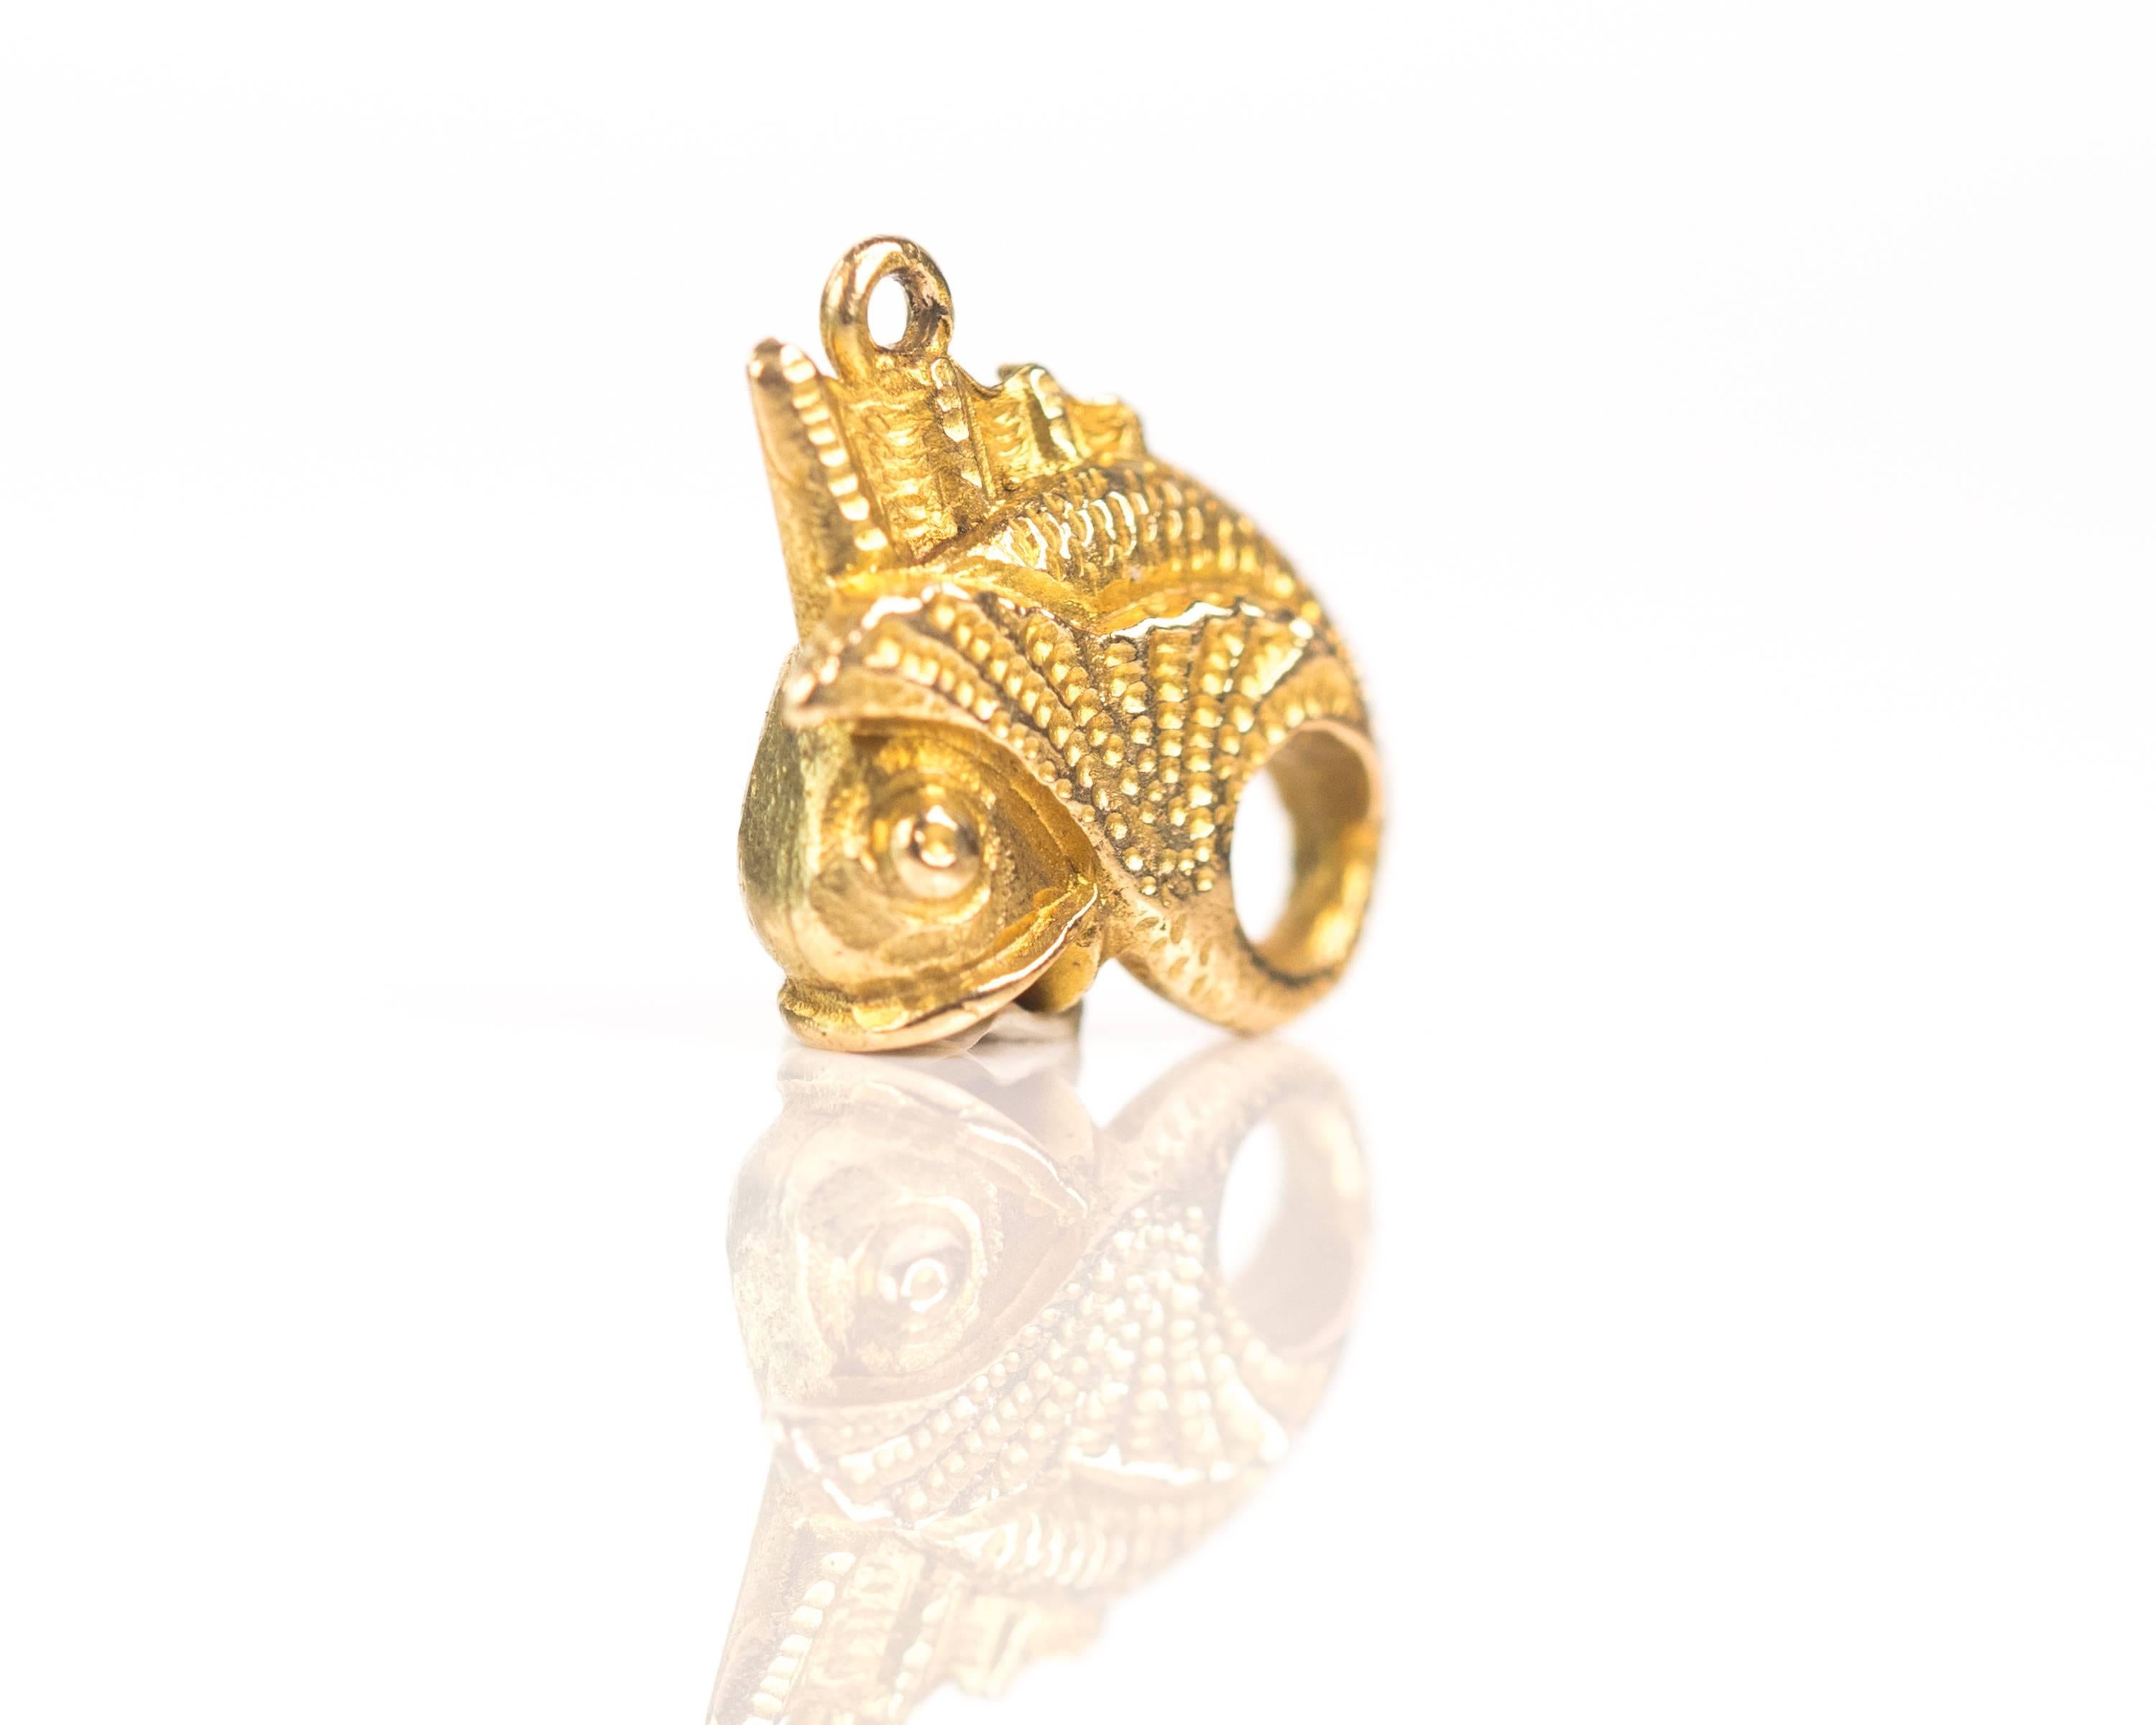 1950s Eternal Circle Fish Charm - 9 Karat Yellow Gold 

This exquisitely detailed Fish Charm is crafted from 9 Karat Yellow Gold. The fish is curved into a circle. The mouth is open and the two round eyes seem to pop just in front of the gills. A